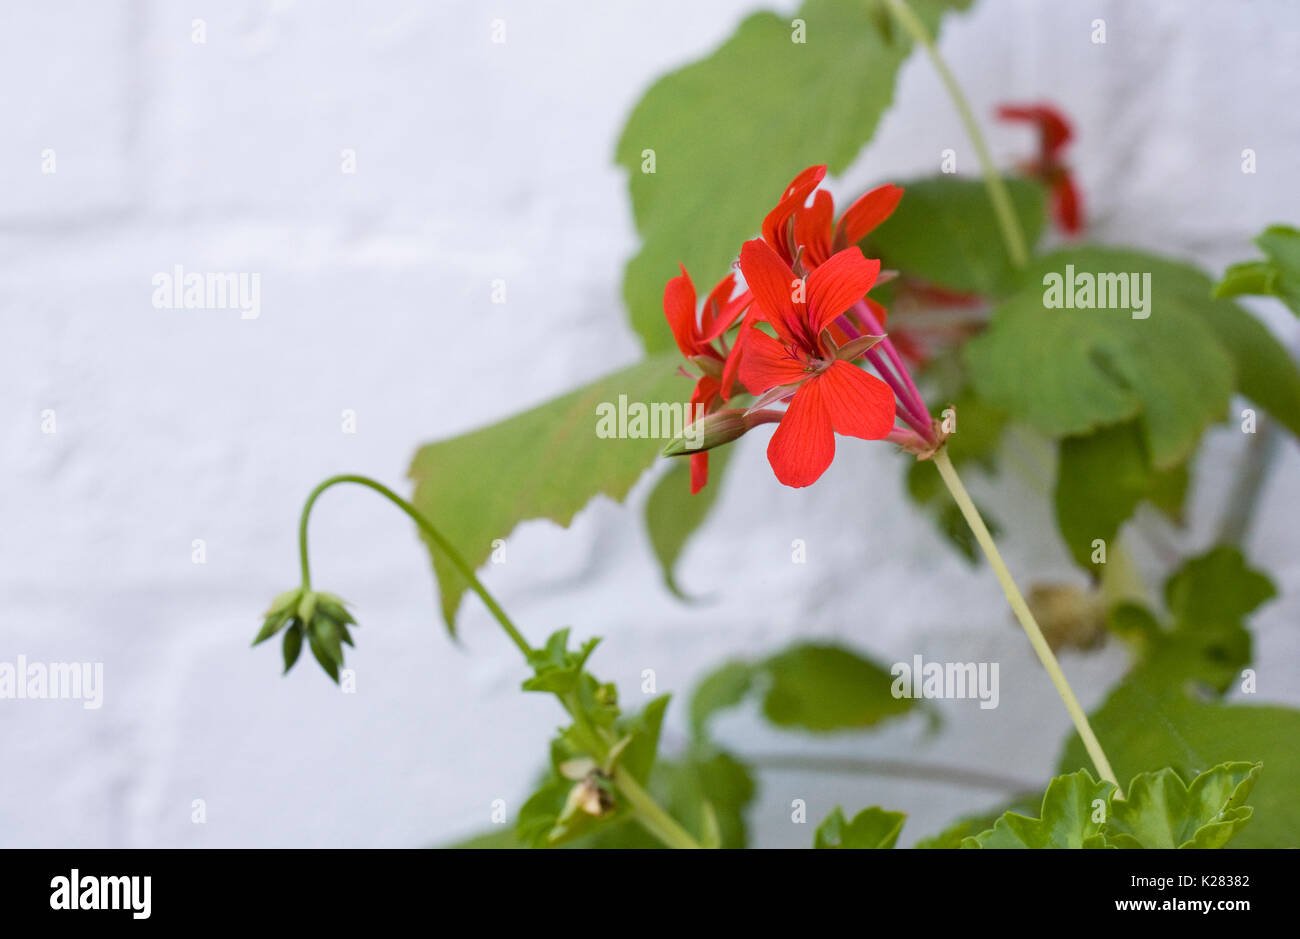 Ivy leaved pelargonium in flower against a white brick wall. Stock Photo